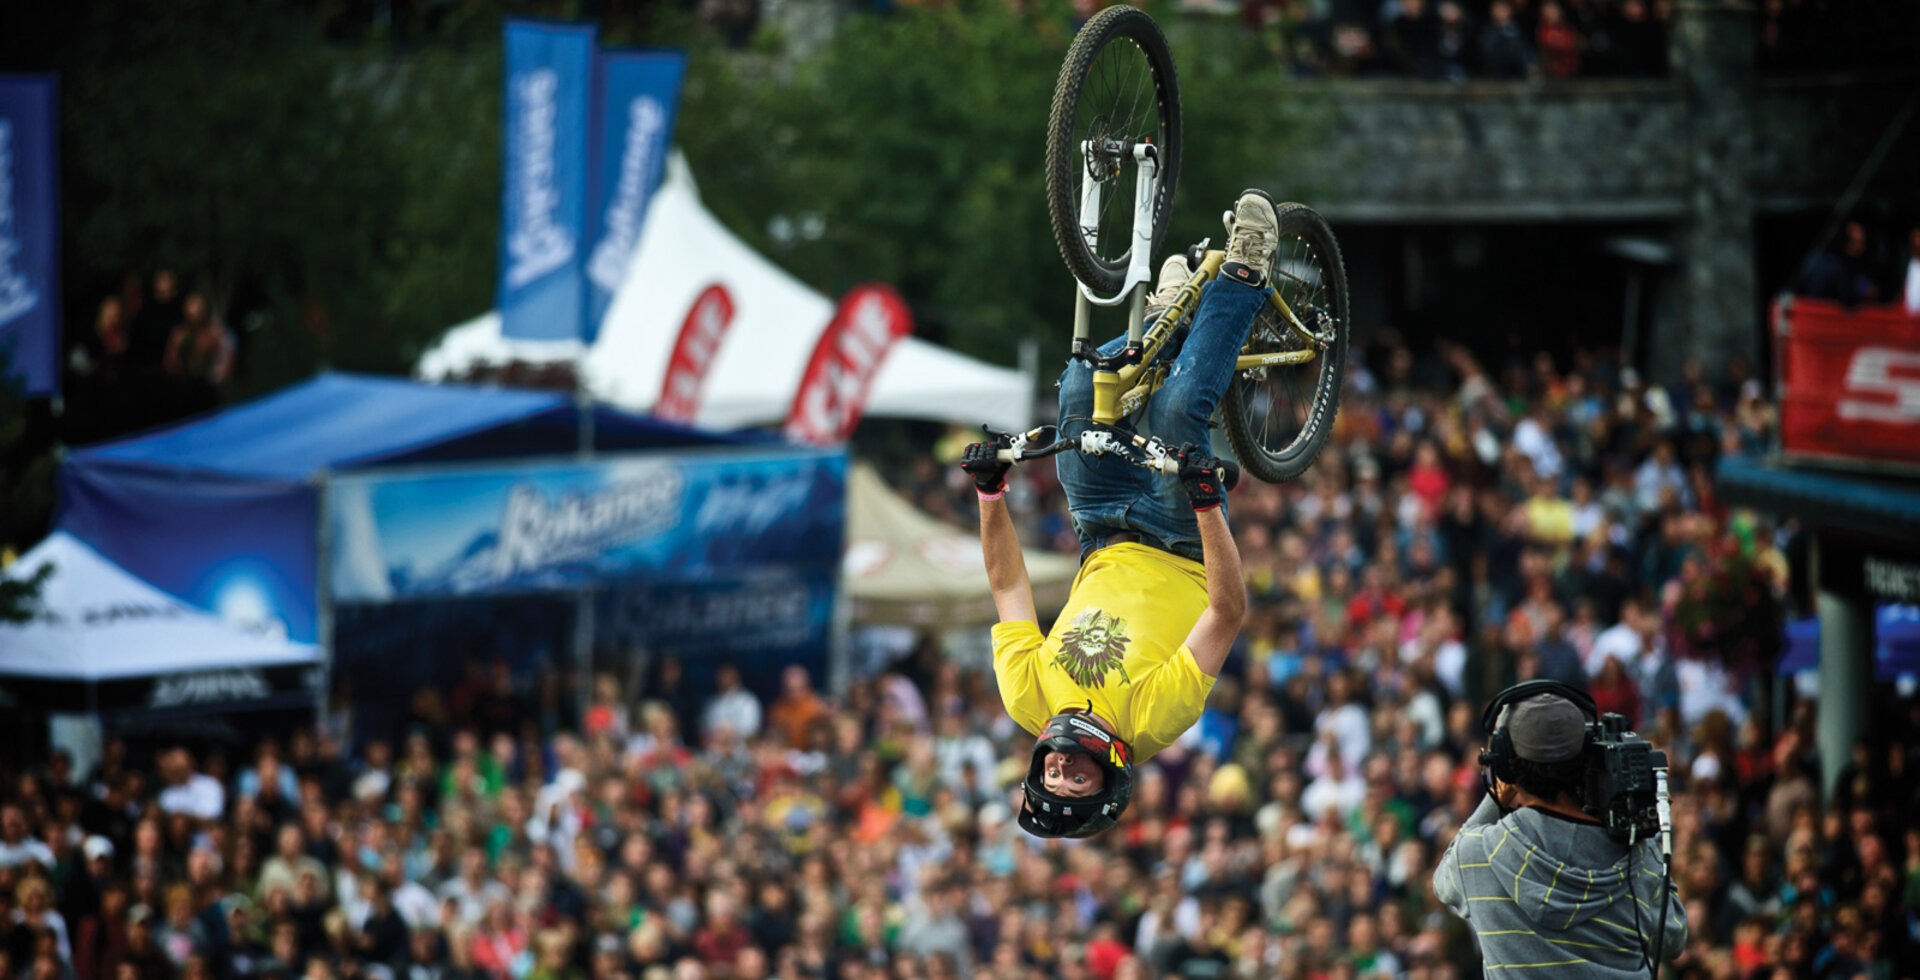 The beauty of progression is that it’s often unexpected, such as when Greg Watts threw down his winning run in the 2009 slopestyle. With multiple flip-whips, 360s and backflips, it’s a run that Cam Zink still says “would hold up today.” Watts spots his landing on the course’s final jump. Photo: Yorick Carroux